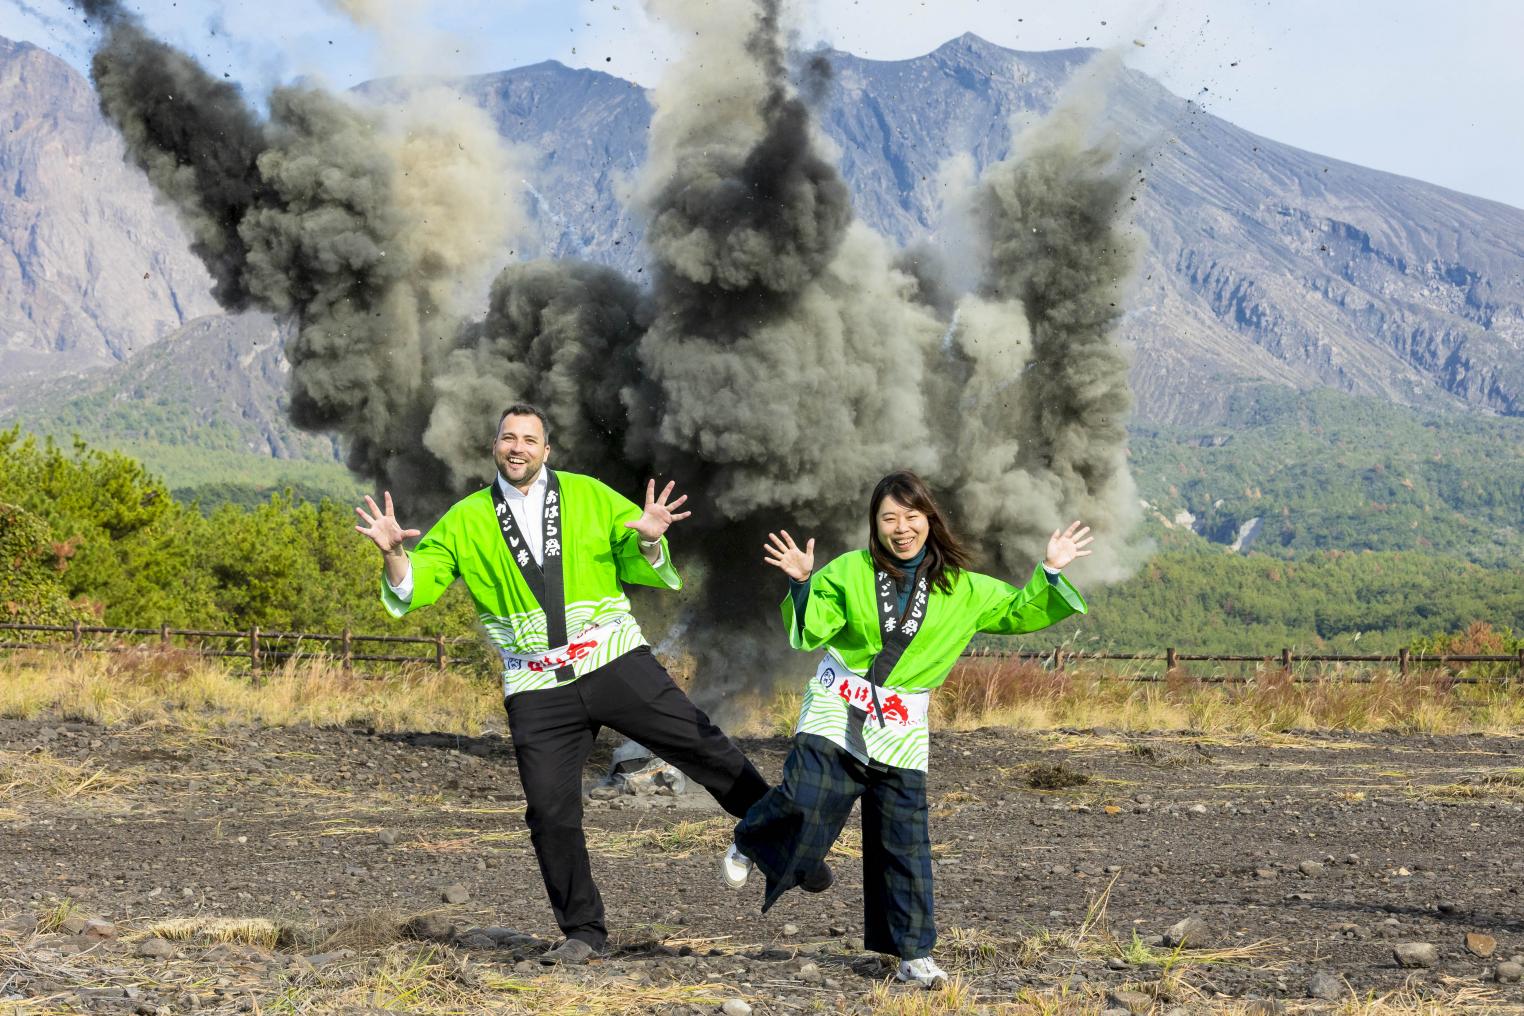 Explosion x Explosion! Photography tour with the active volcano Sakurajima in the background-3